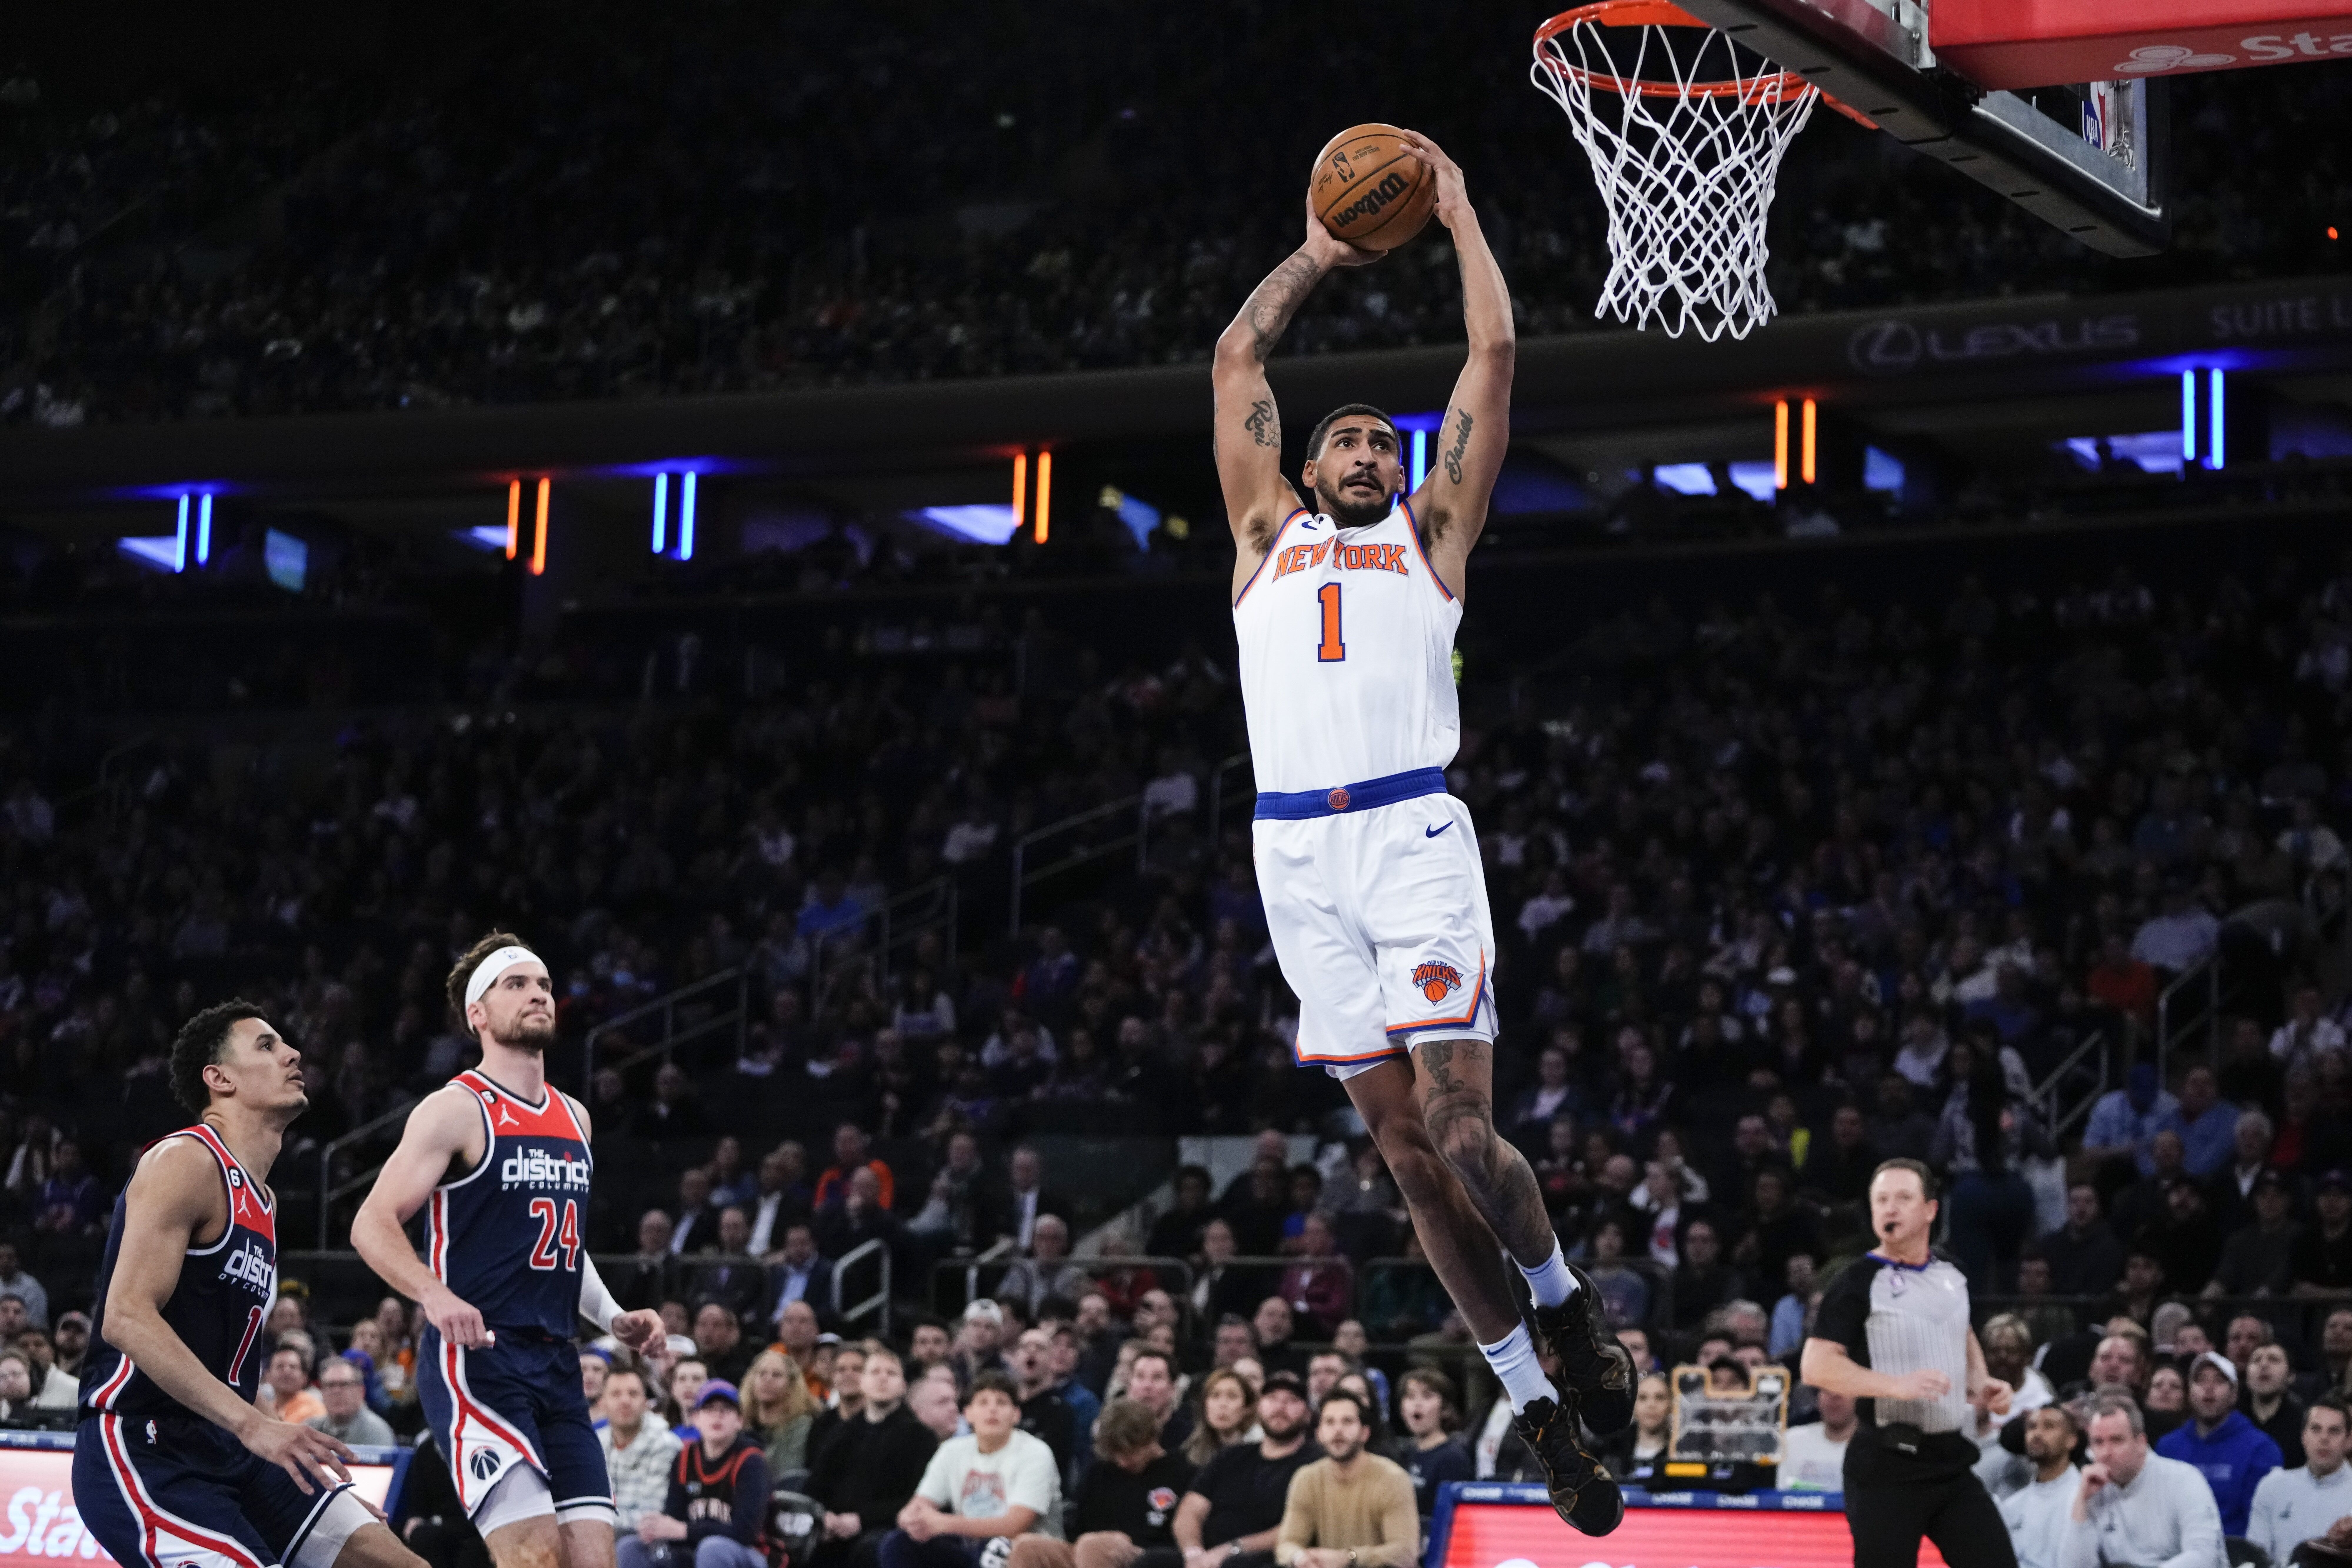 New York Knicks: Will The Losses Have An Economic Effect?